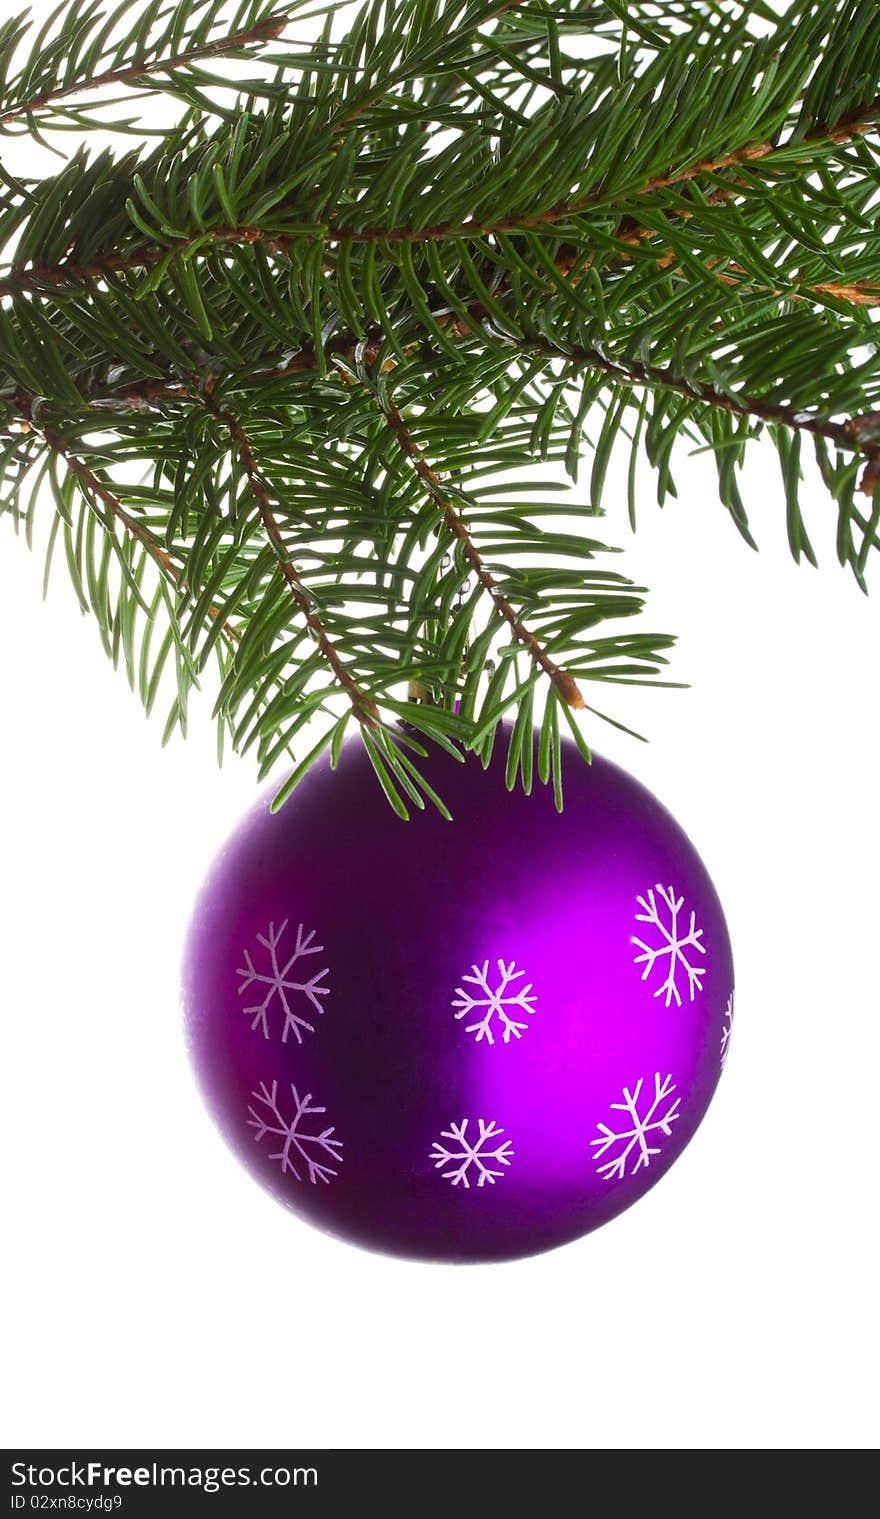 Close-up purple ball on fir tree branch, isolated on white